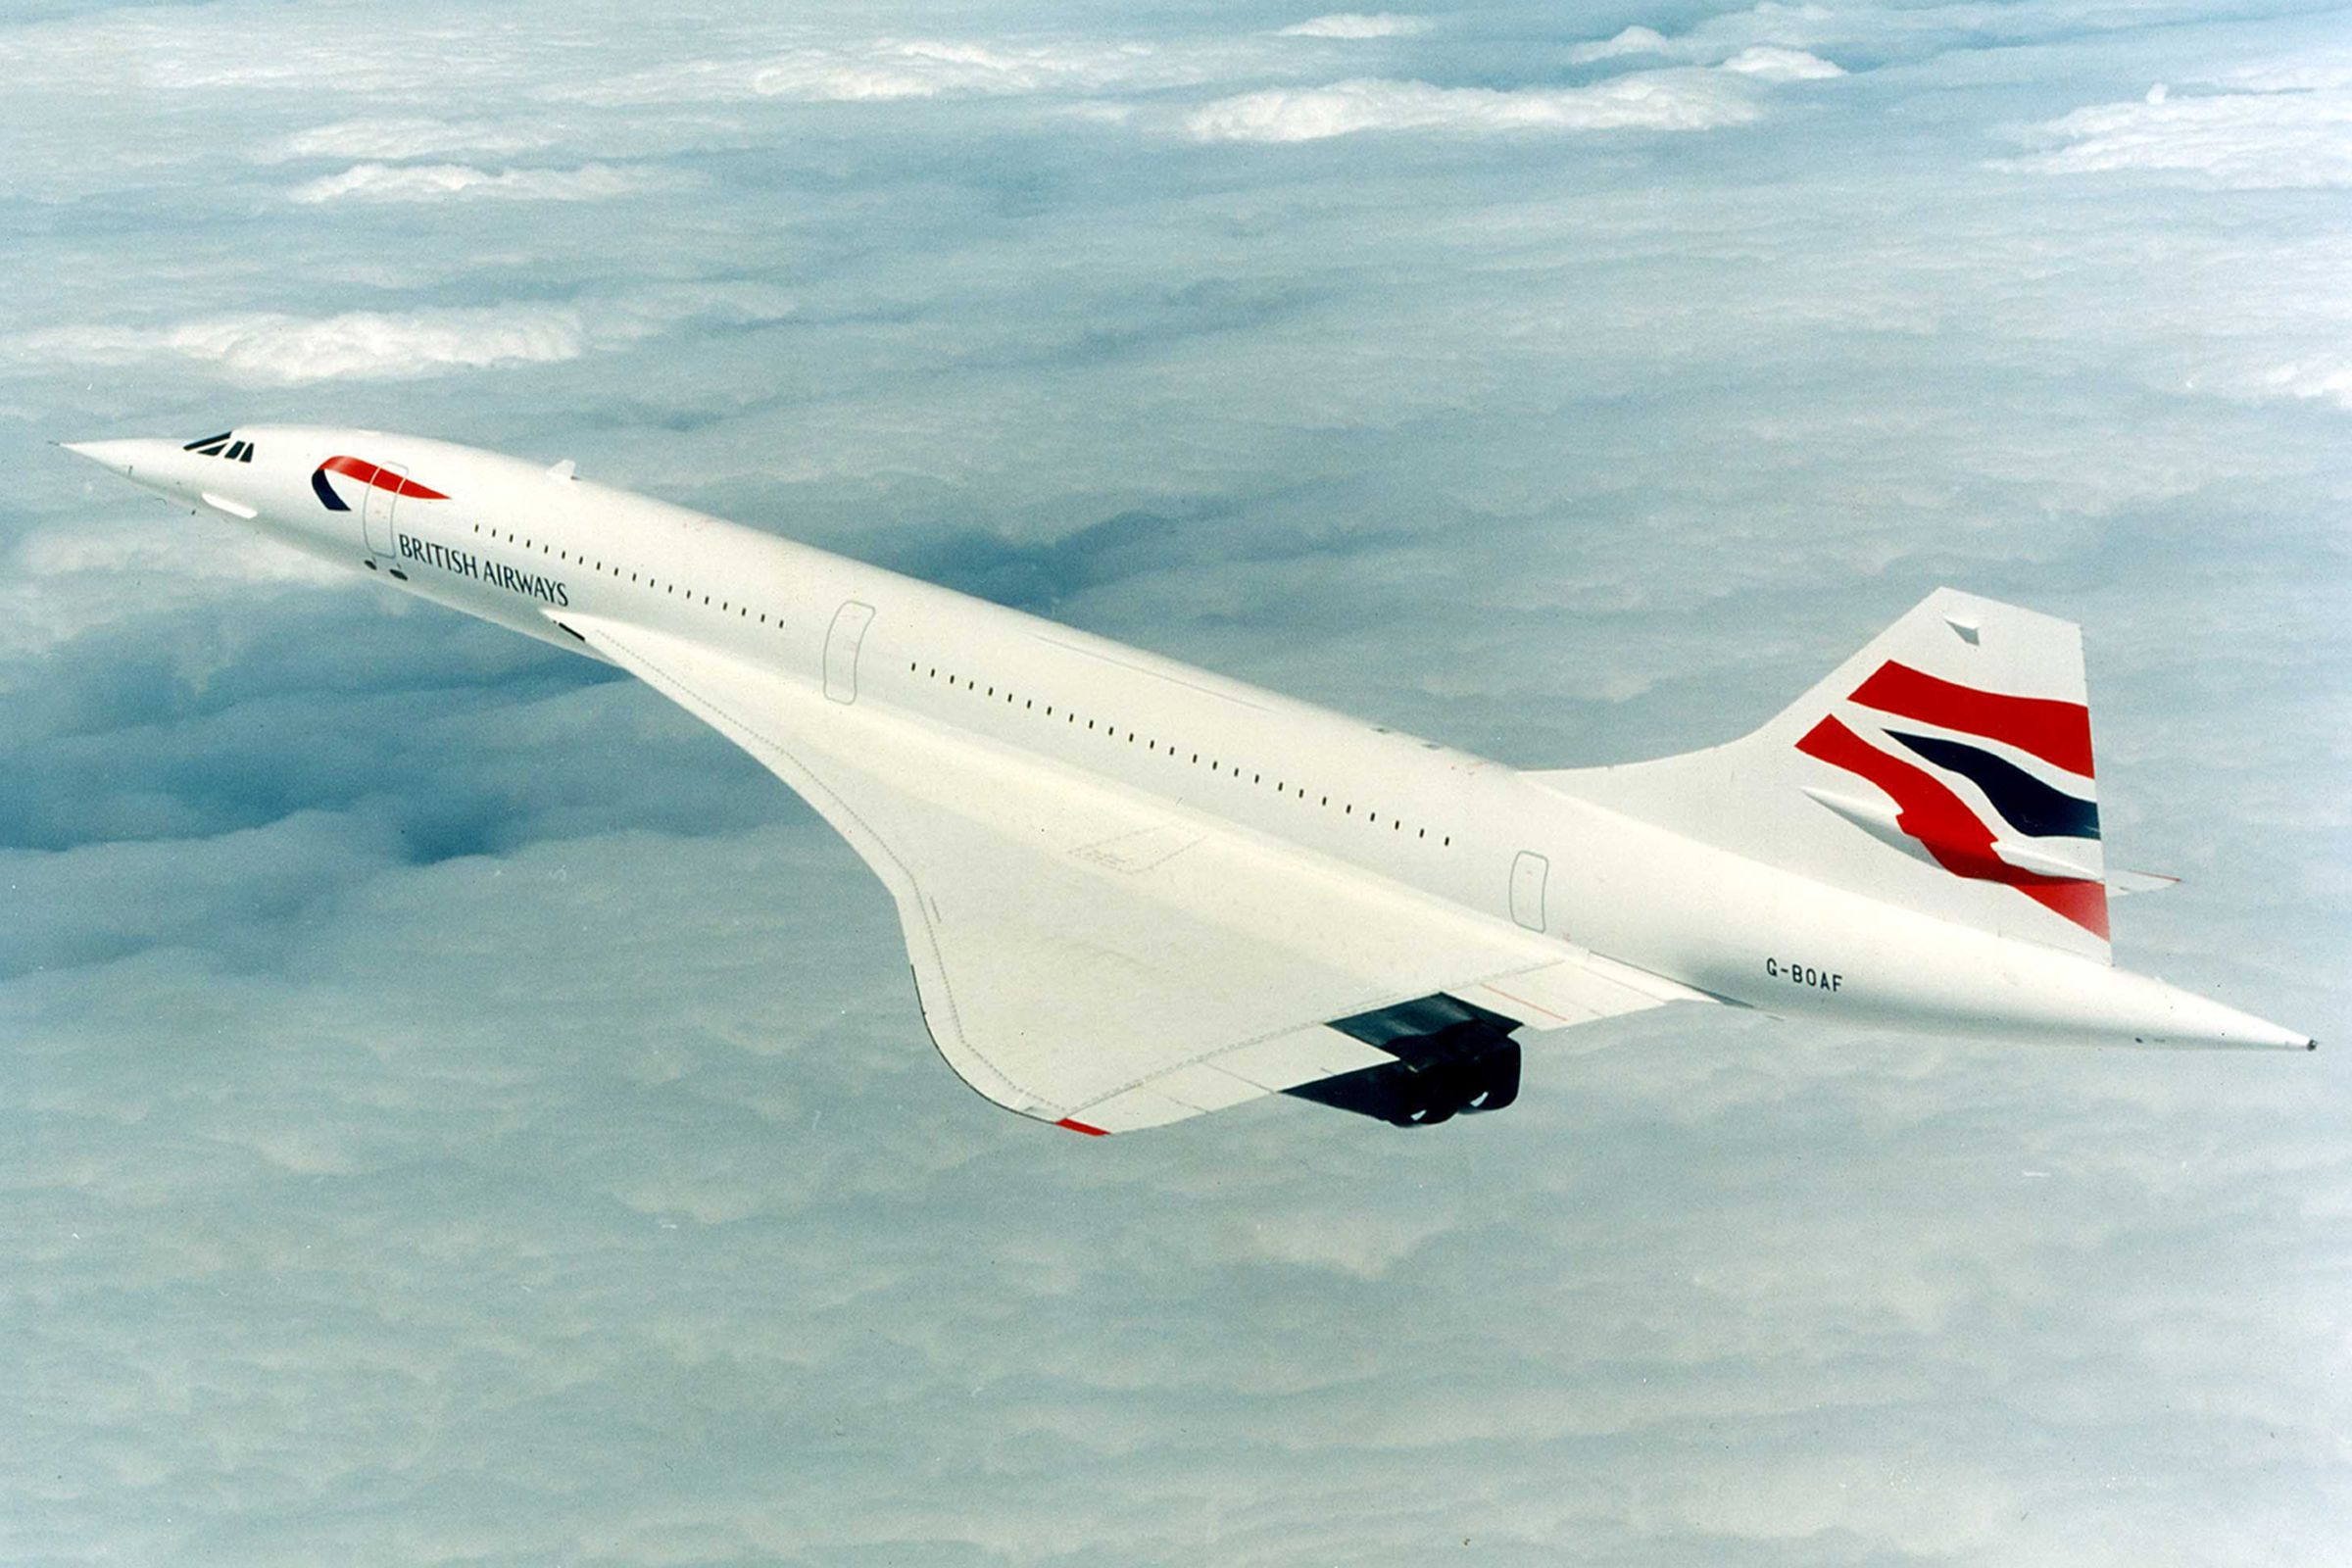 No supersonic jet has flown since the Concorde shut down over 20 years ago. 